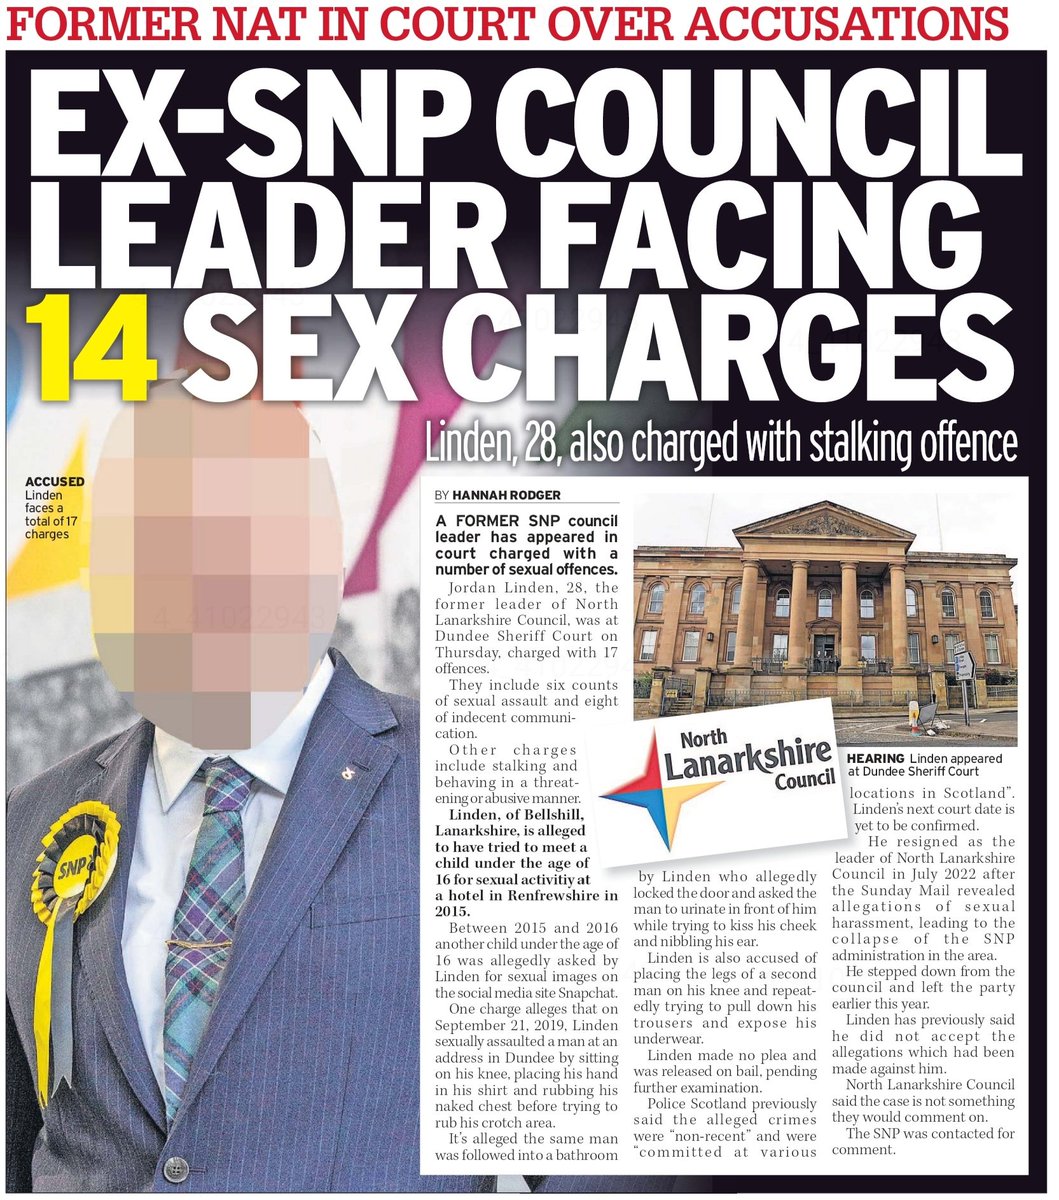 The SNP: A political party like no other. How many is that now?